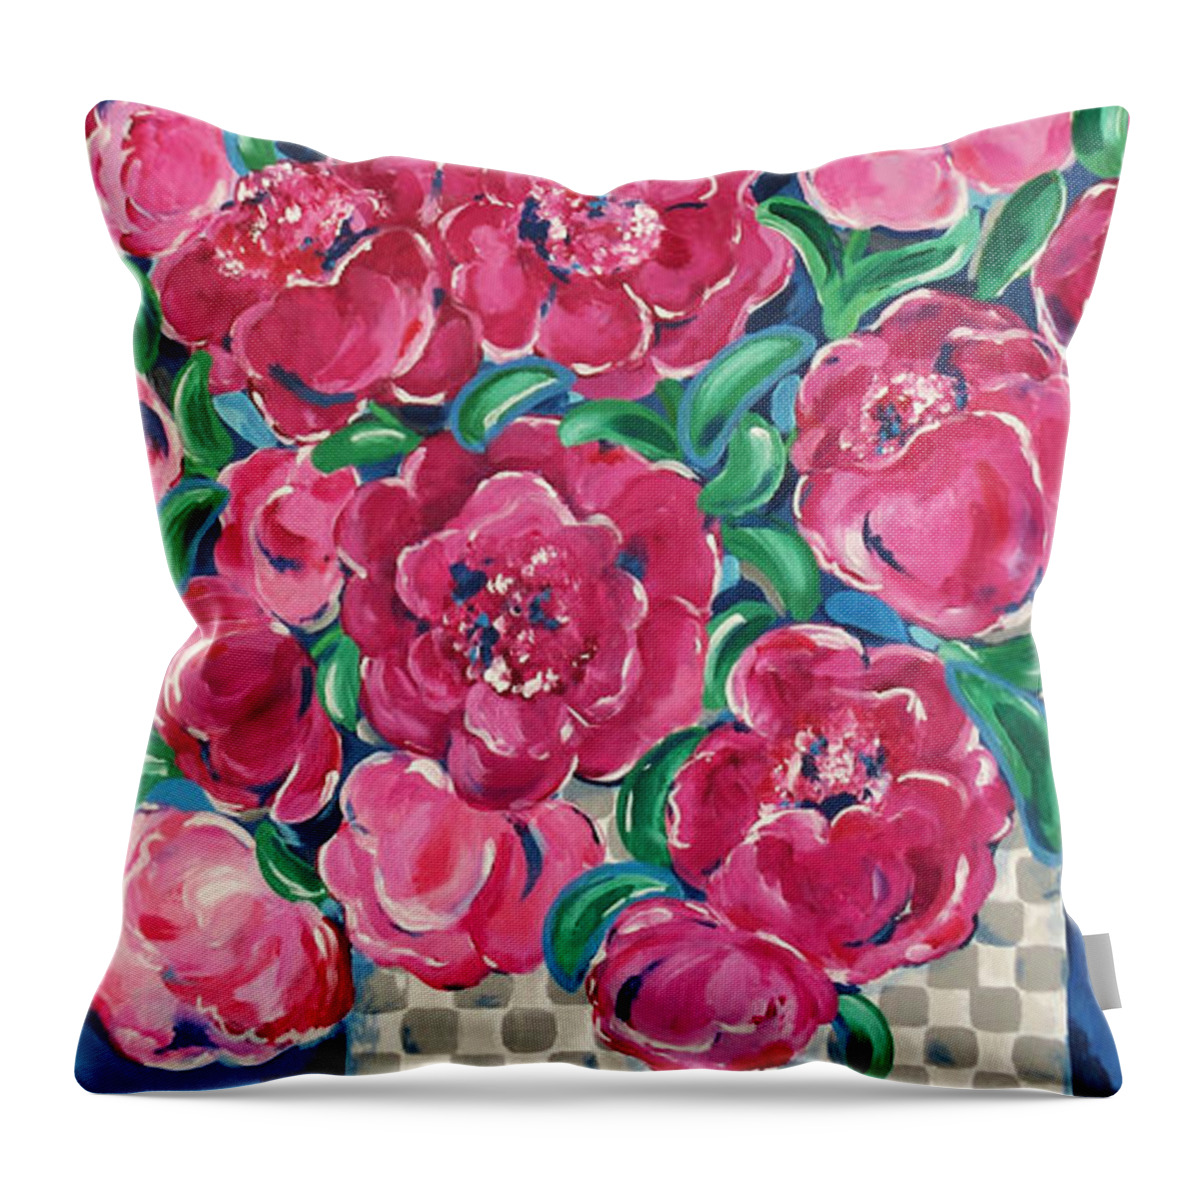 Floral Art Throw Pillow featuring the painting Gathering by Beth Ann Scott